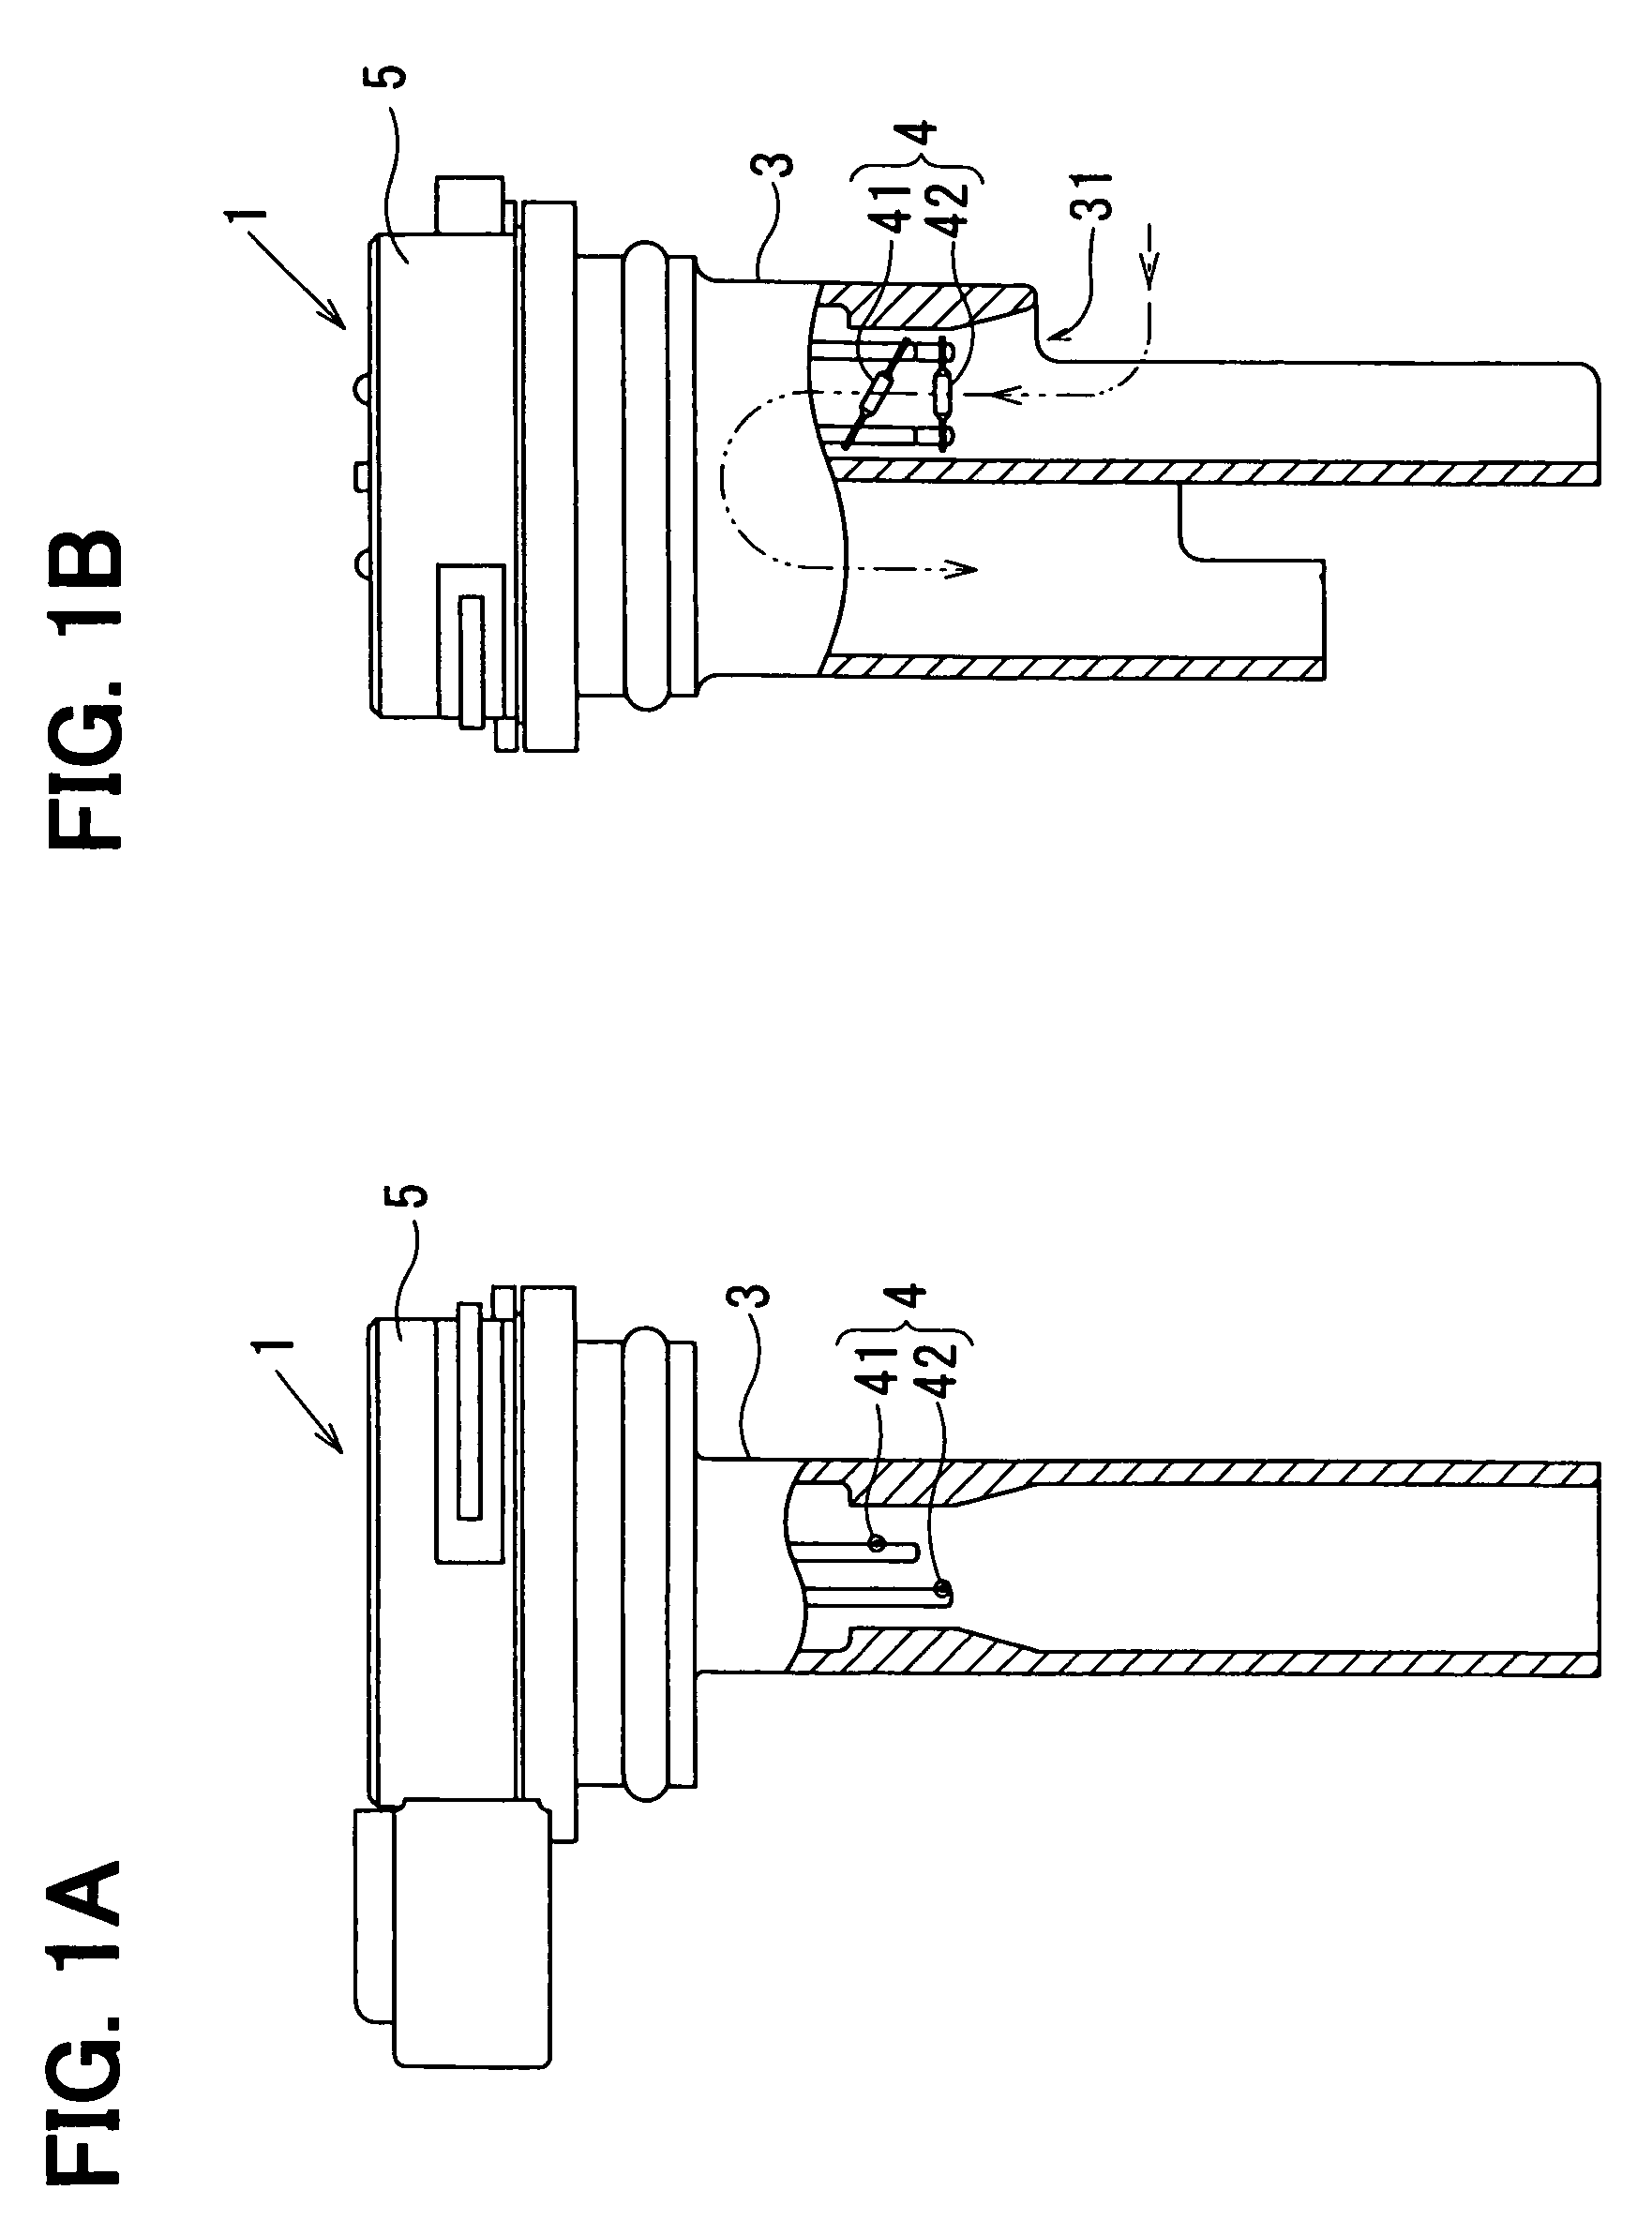 Flow measuring device having heating resistor in inclined position with respect to the flow direction